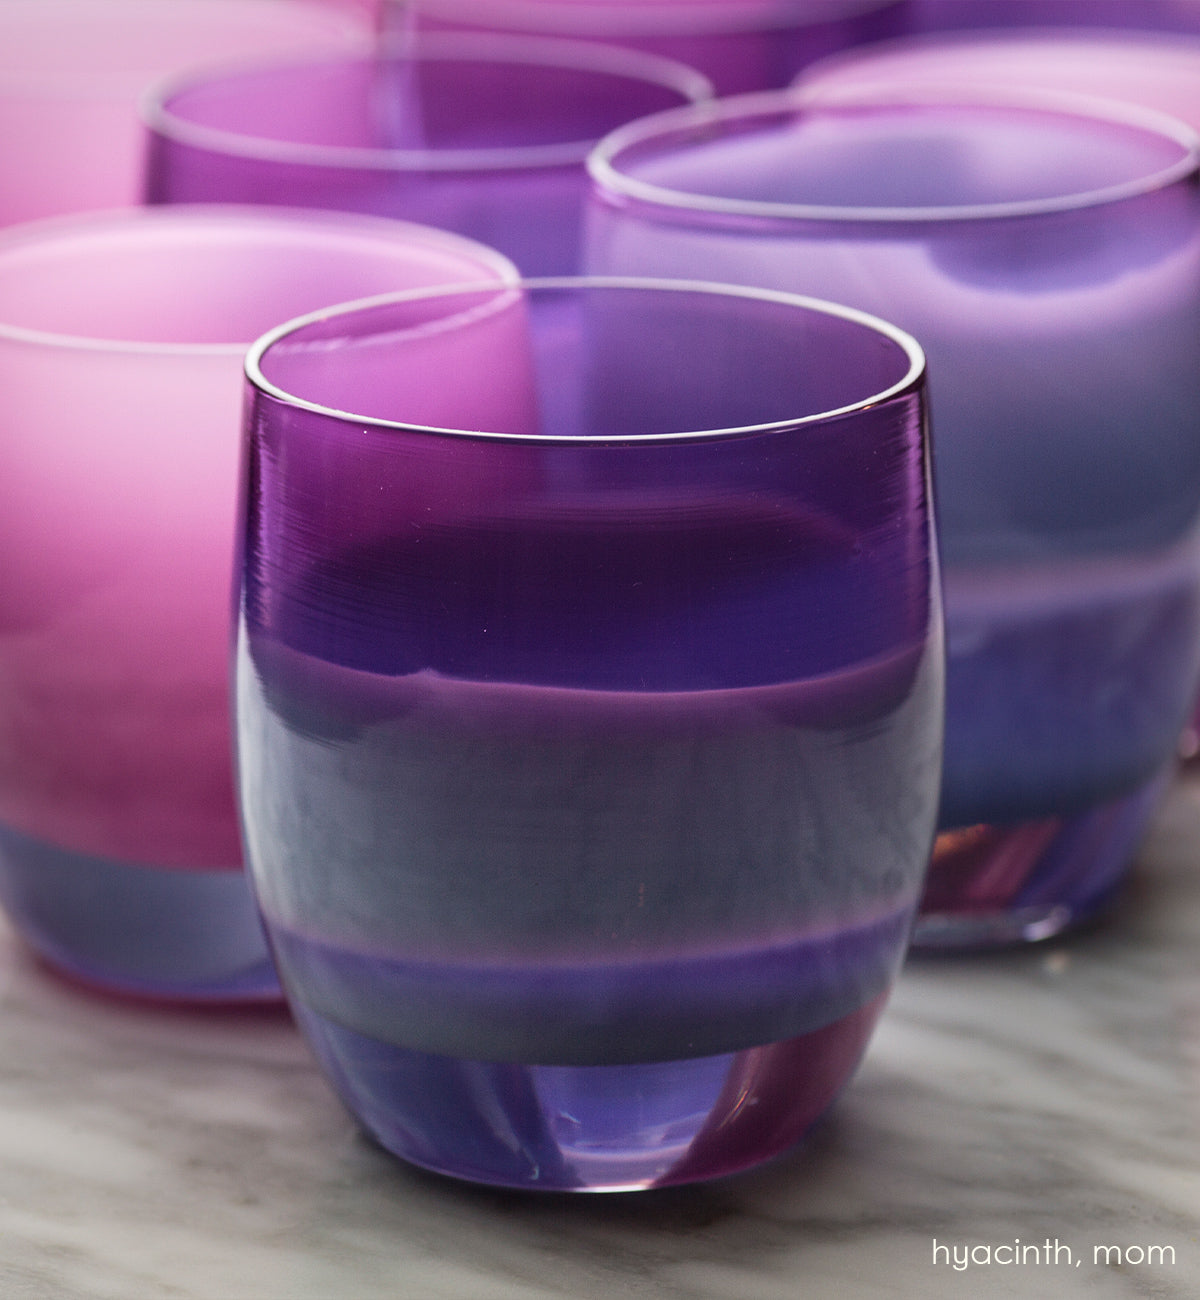 hyacinth amethyst hand-blown glass votive candle holder. Paired with mom